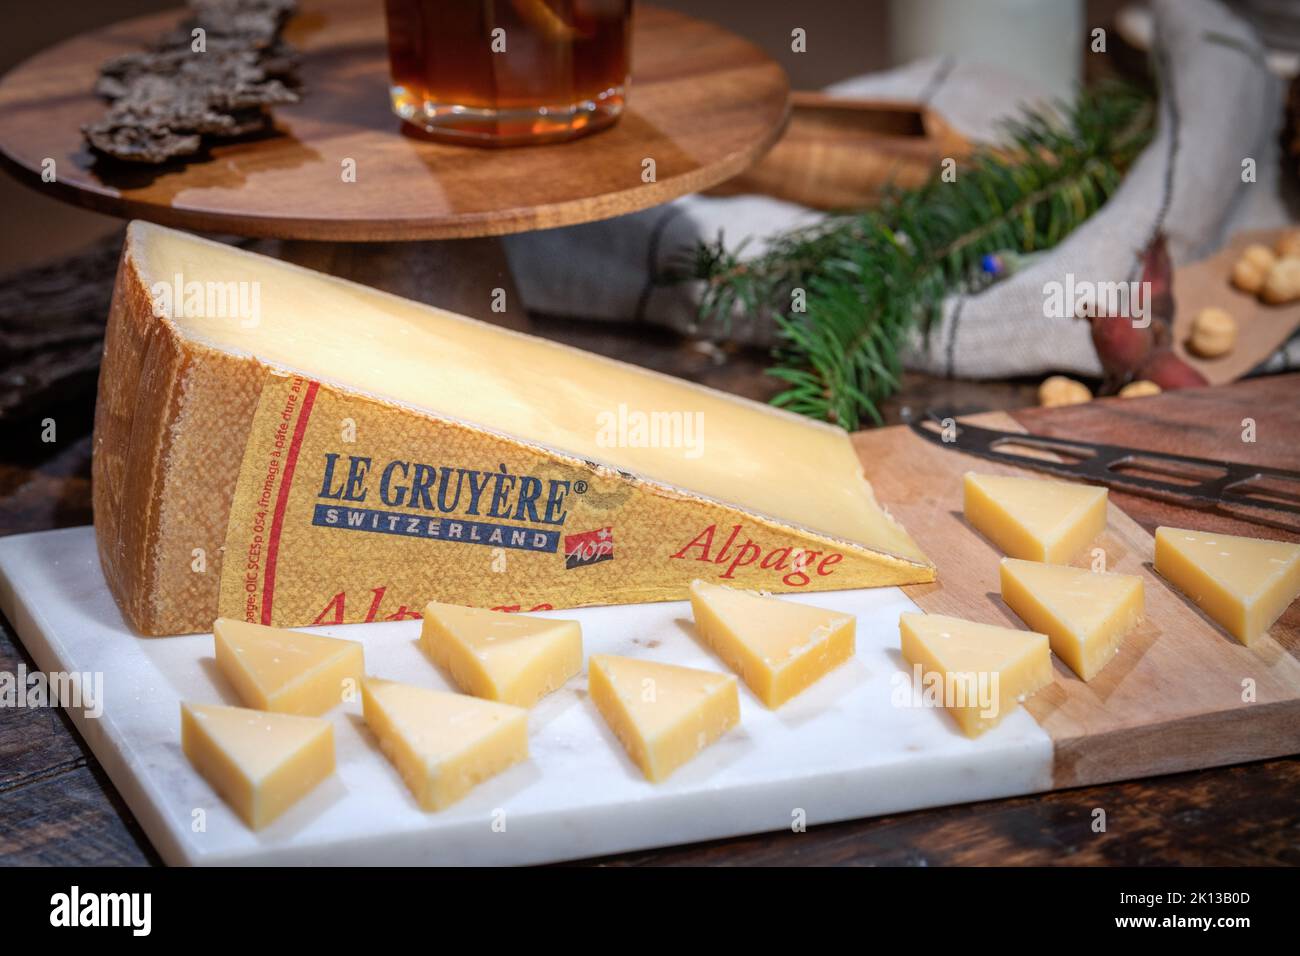 July 12 2022, Lyon, France : Tasted famous swiss cheese : Le Gruyère d'Alpage with milk and honey for lunch and food experience Stock Photo